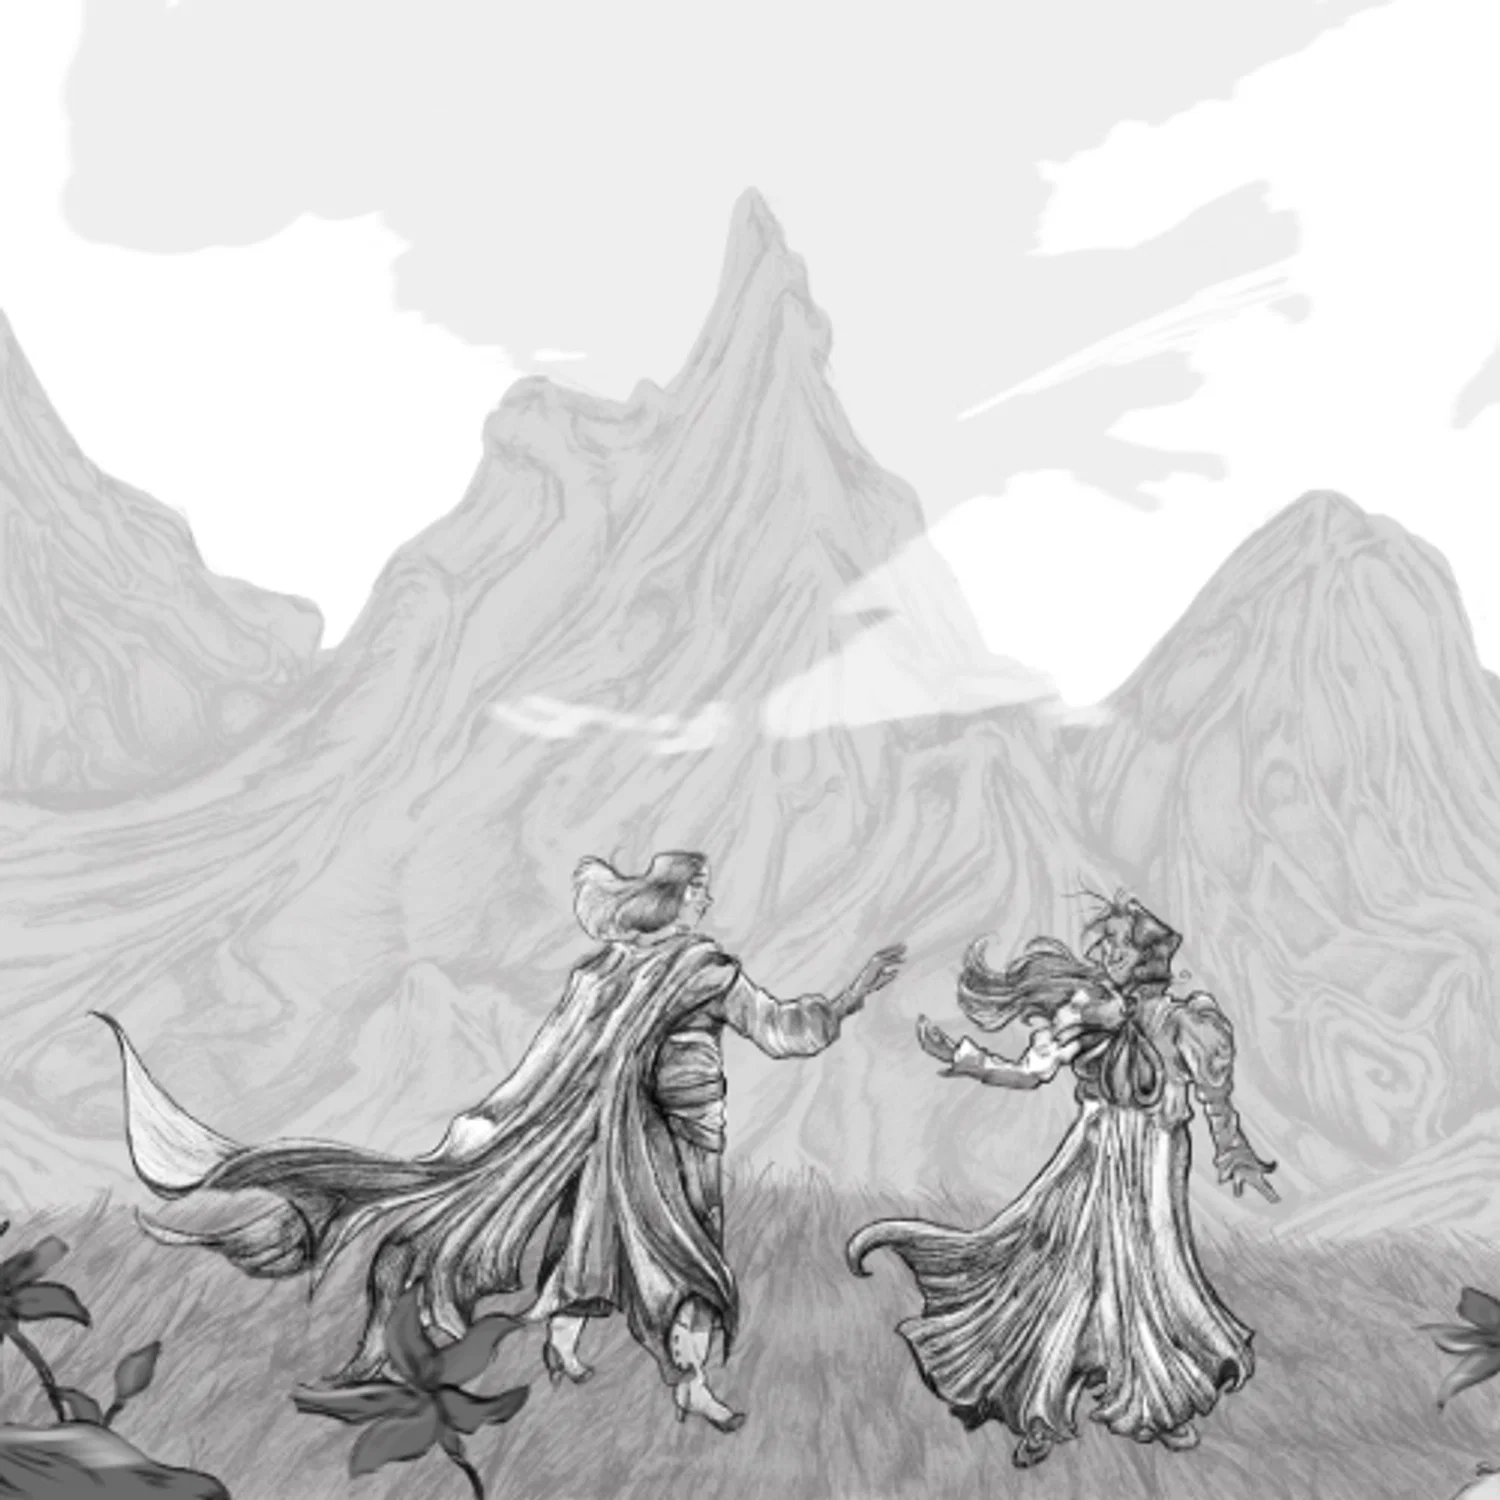 Samson and Blithe are standing amongst mountains, stretching their hands to each other. Black and white. 